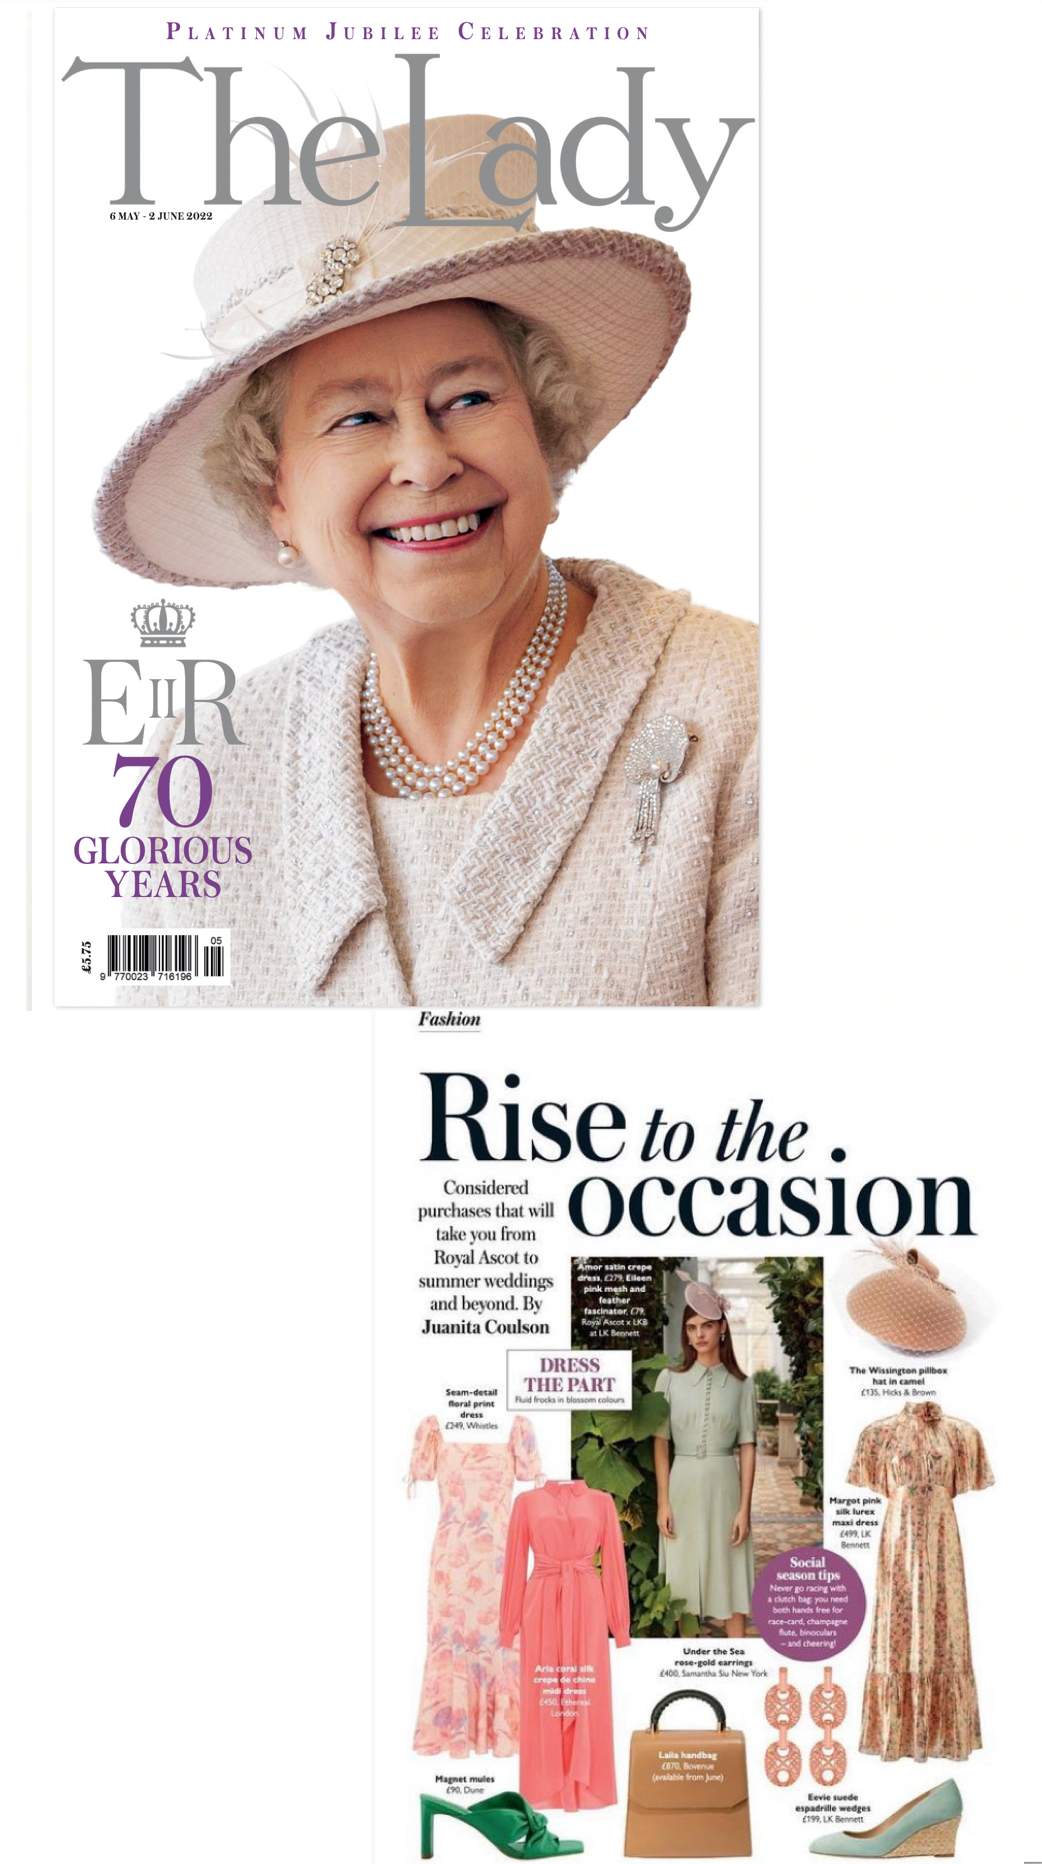 Laila handbag featured in The Lady's Magazine - Queen Elizabeth's Platinum Jubilee Issue